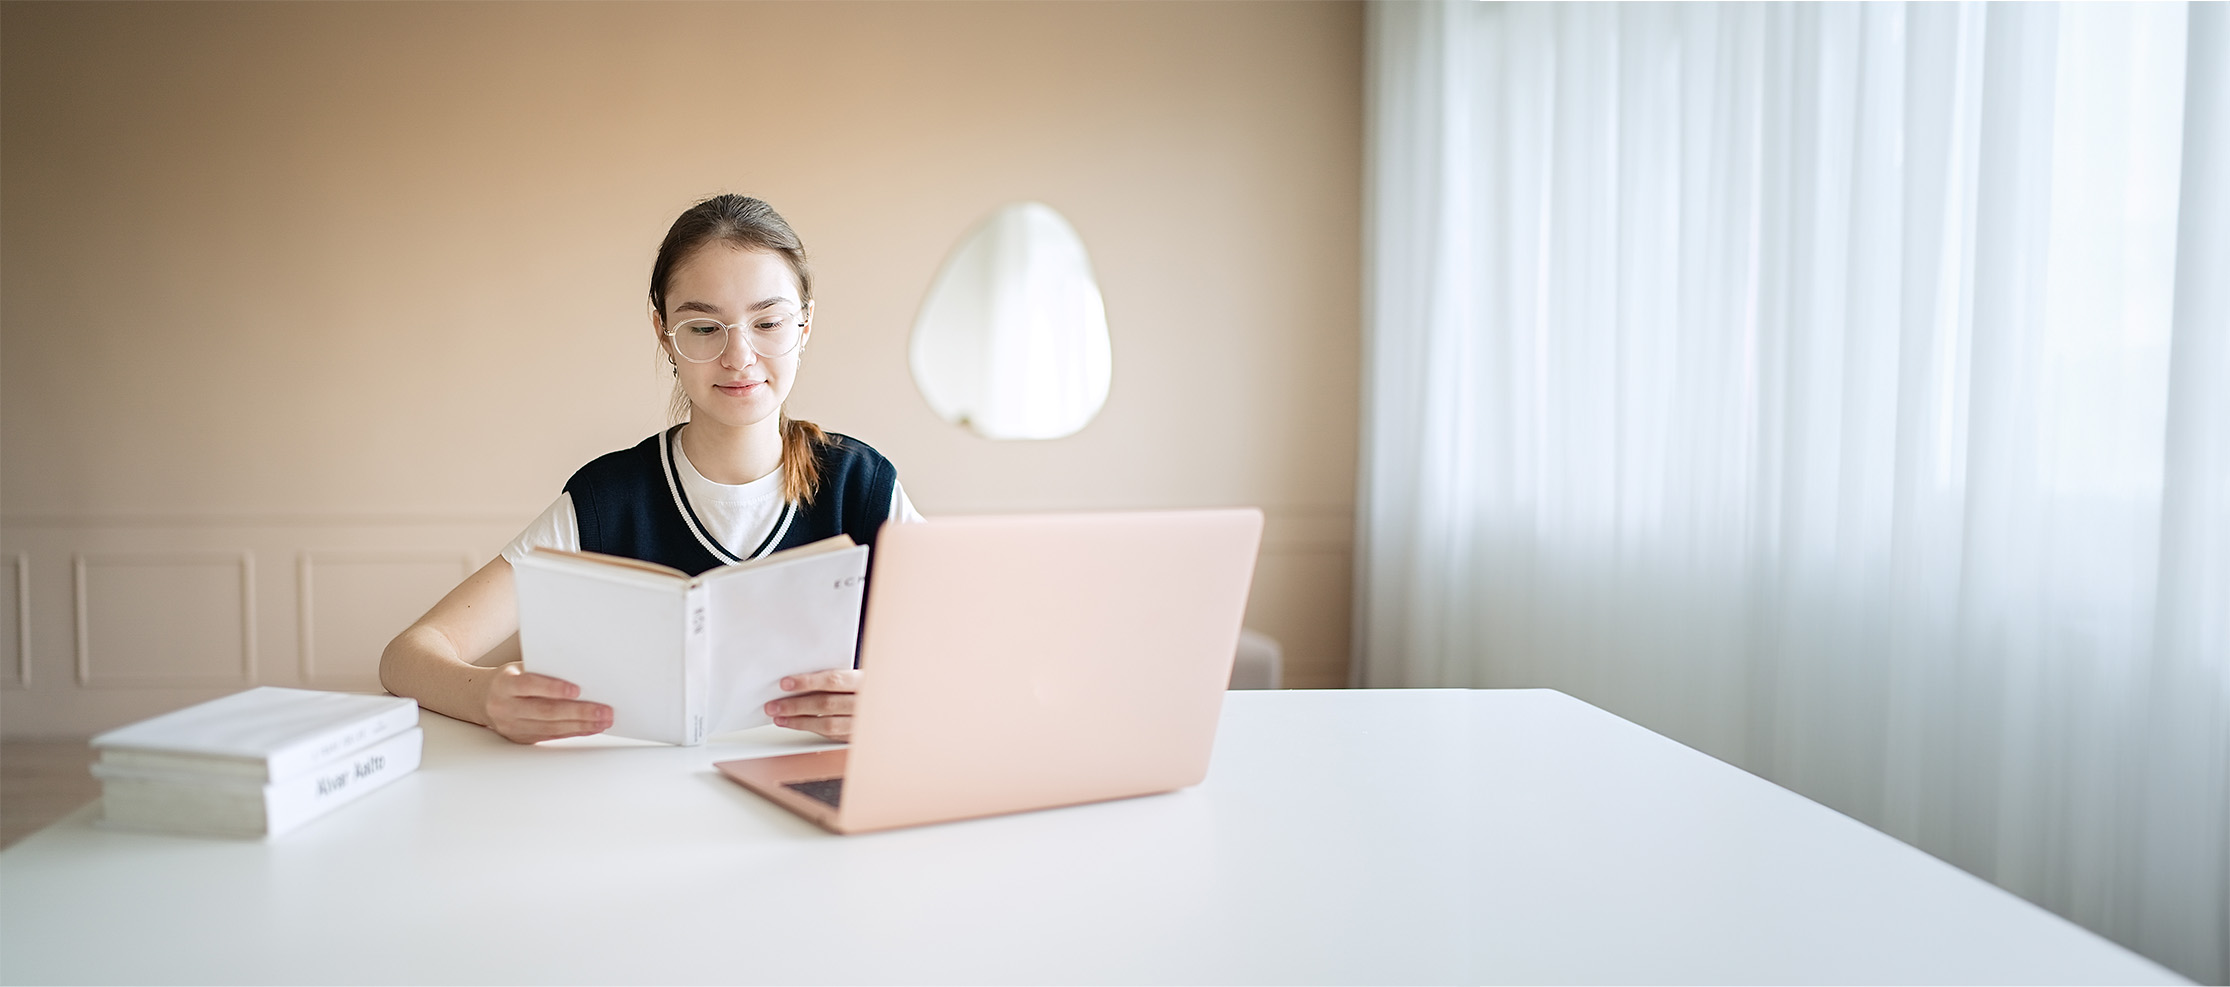 Girl reading book with laptop in front of her